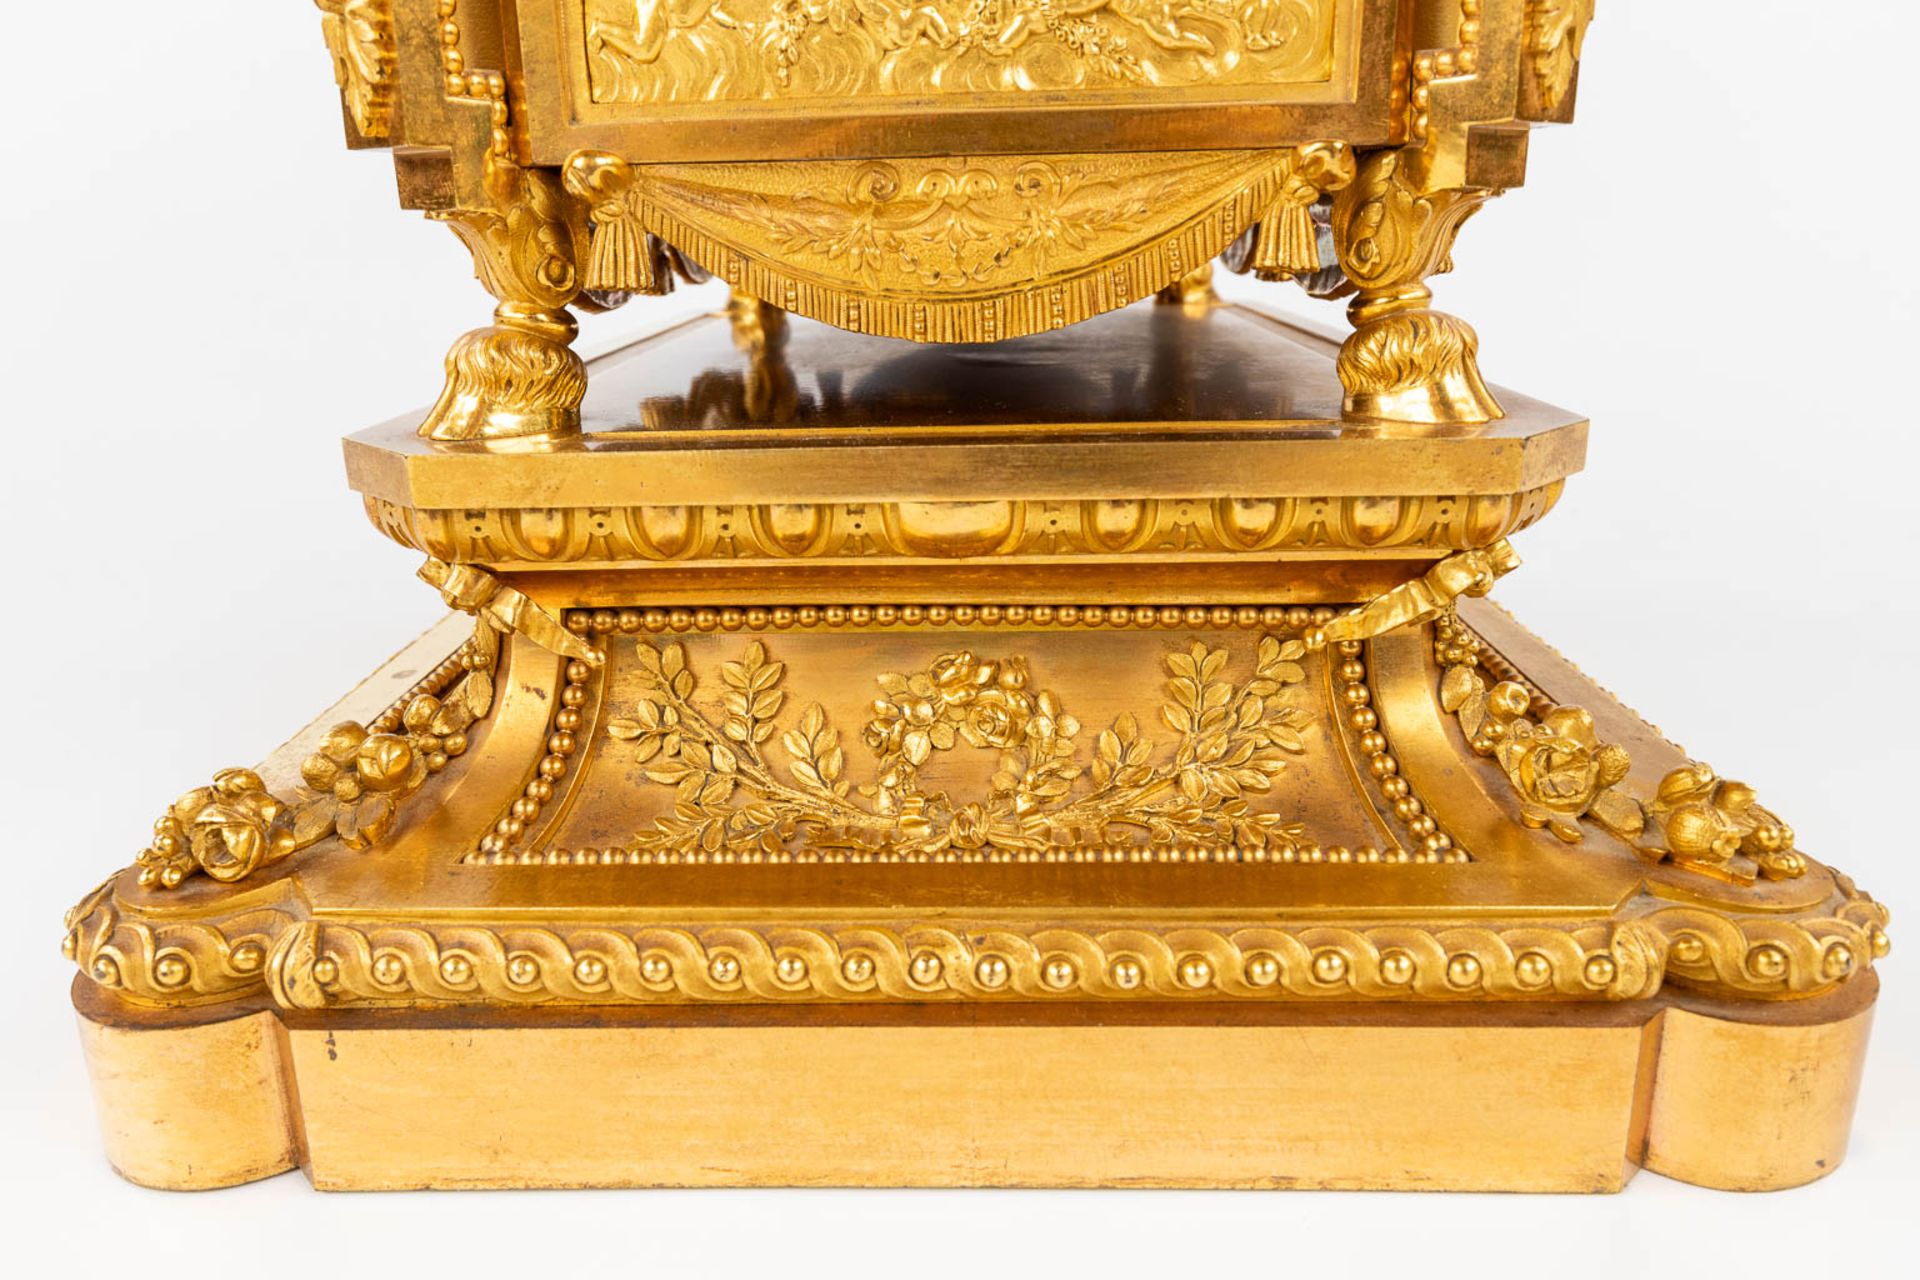 An imposing three-piece mantle garniture clock and candelabra, gilt bronze in Louis XVI style. Maiso - Image 22 of 38